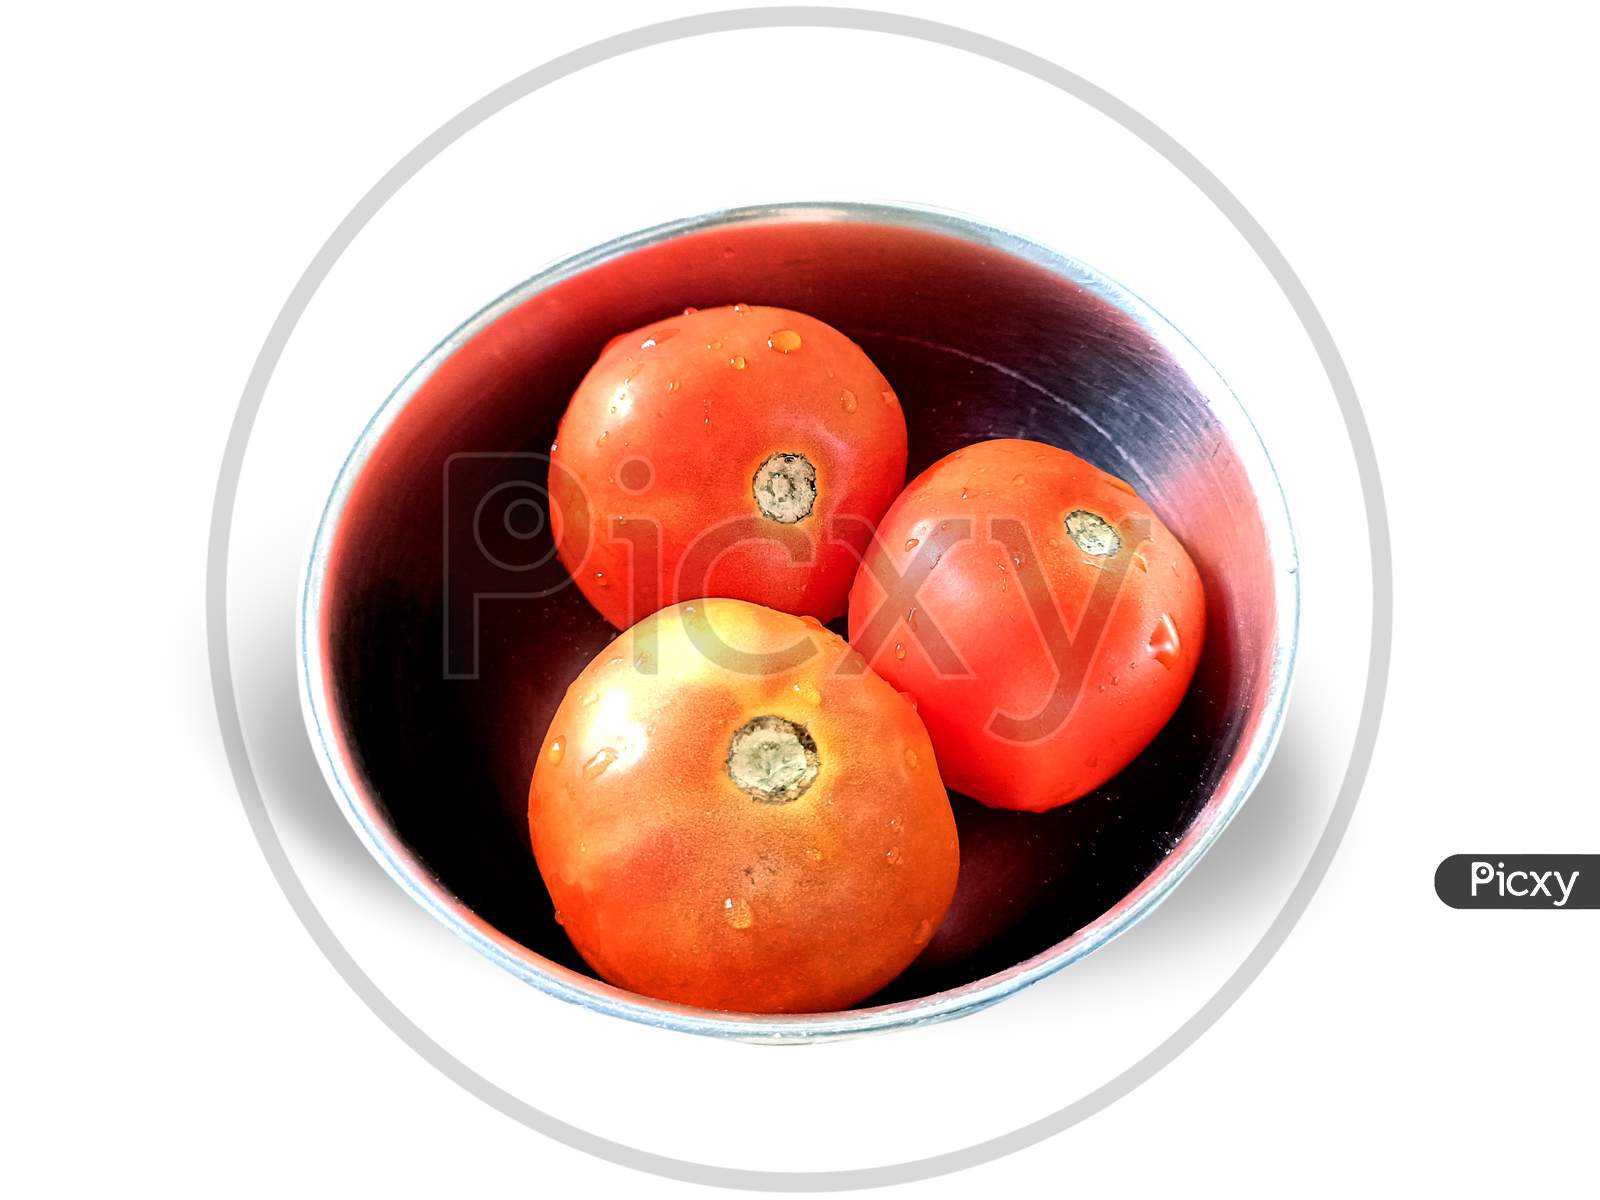 Top View Of Three Ripe Tomatoes In A Steel Bowl On White Background